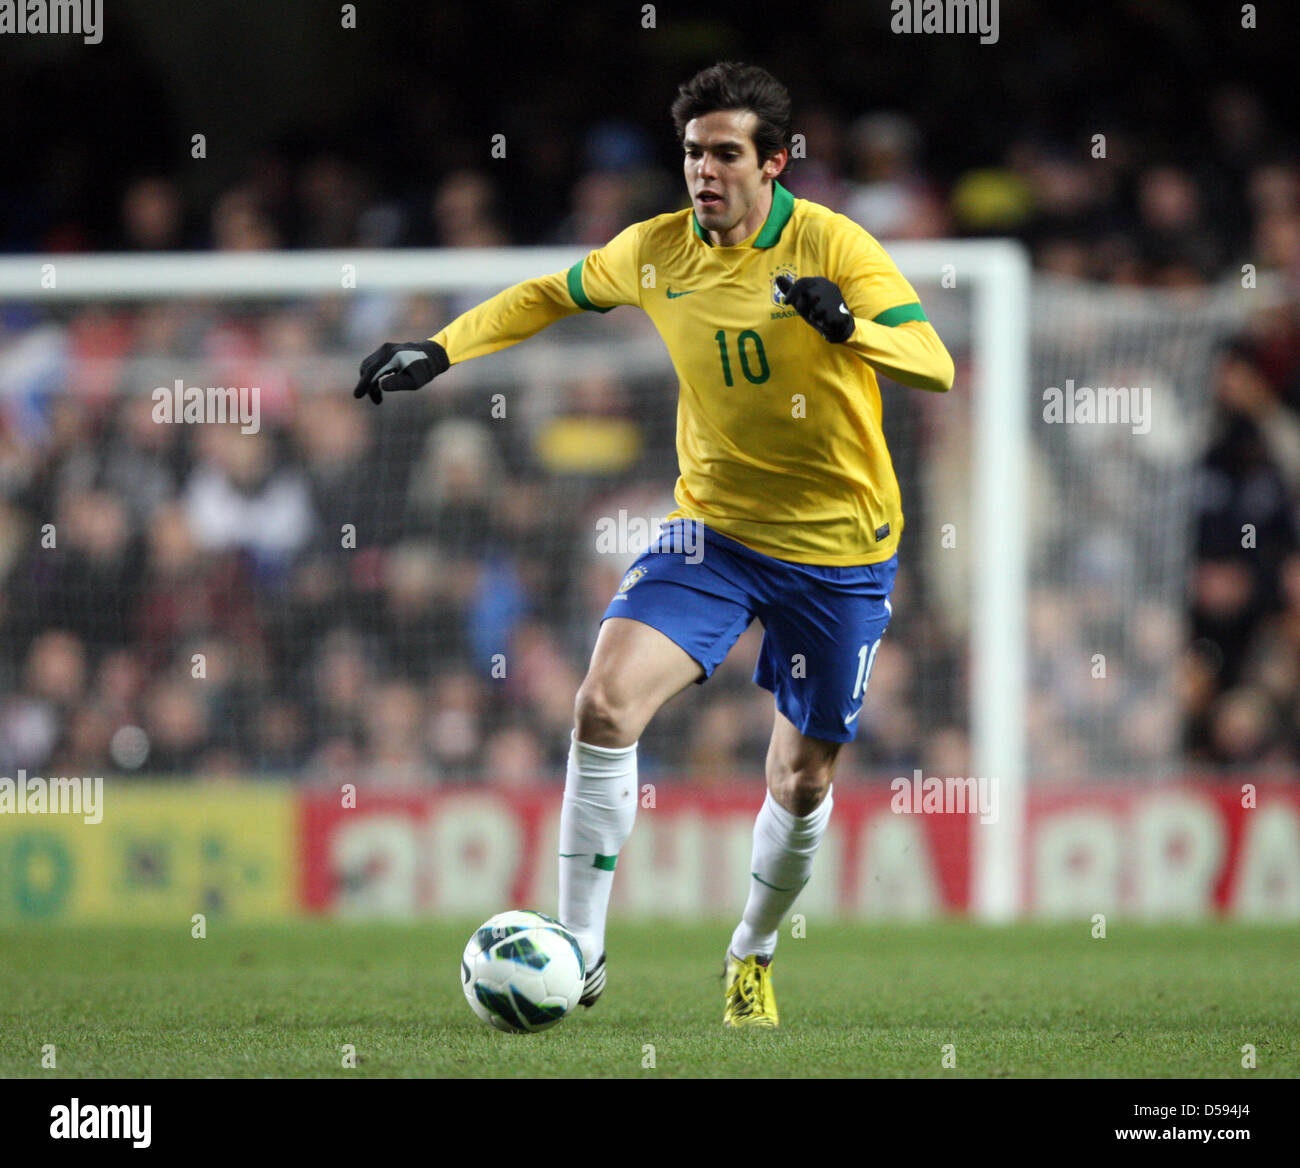 25.03.2013 London, England. Kaka of Brazil during the International Friendly between Brazil and Russia from the Stamford Bridge. Stock Photo